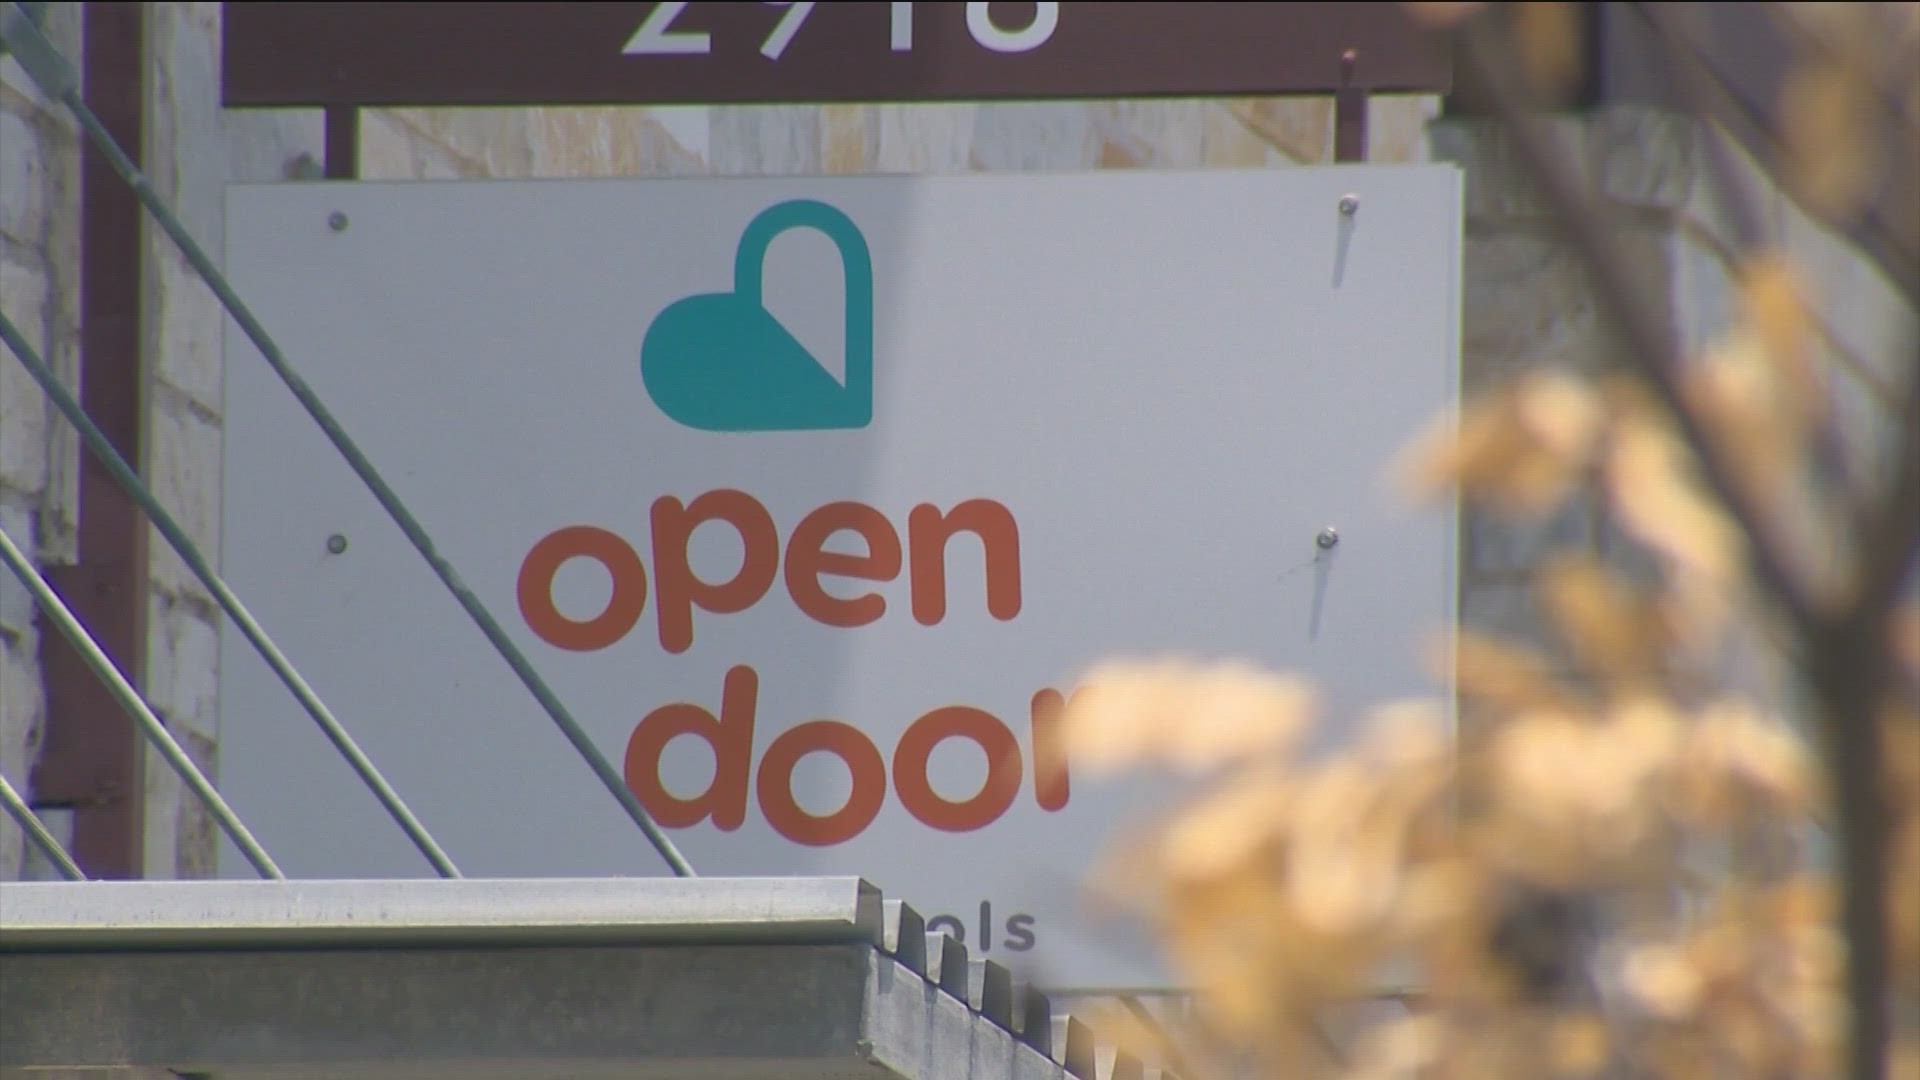 Open Door, a nonprofit in Austin, will receive federal funds to help with early education and sustainability. This will also ease the childcare desert in the area.